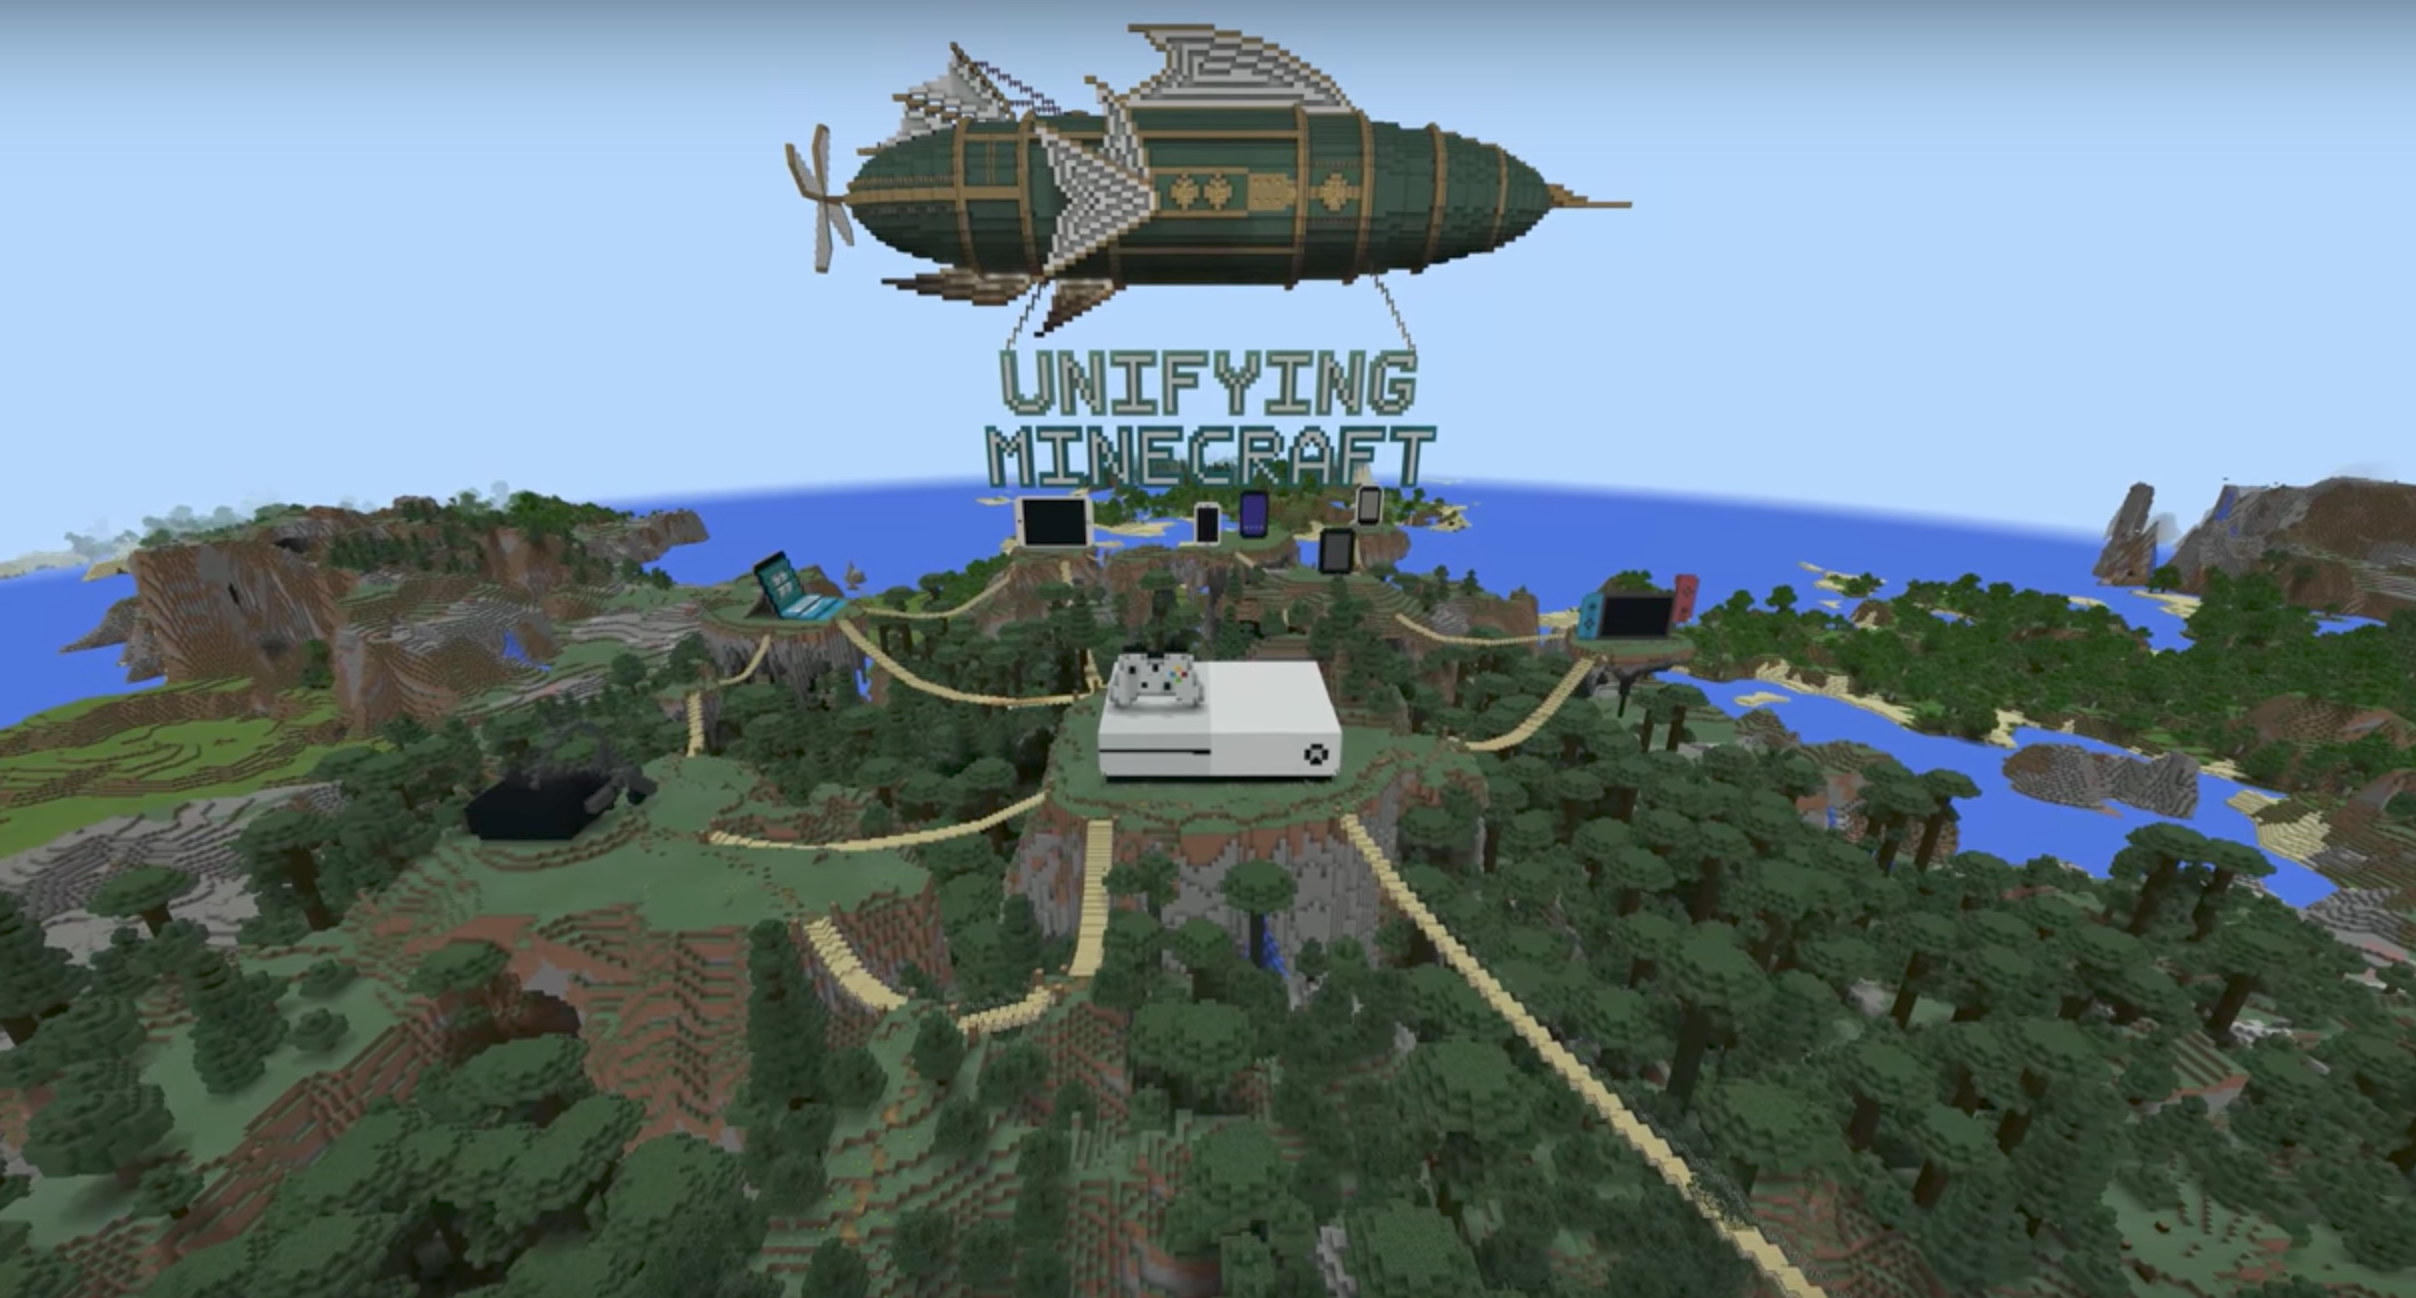 minecraft better together update 4k glory and cross platform play image 1